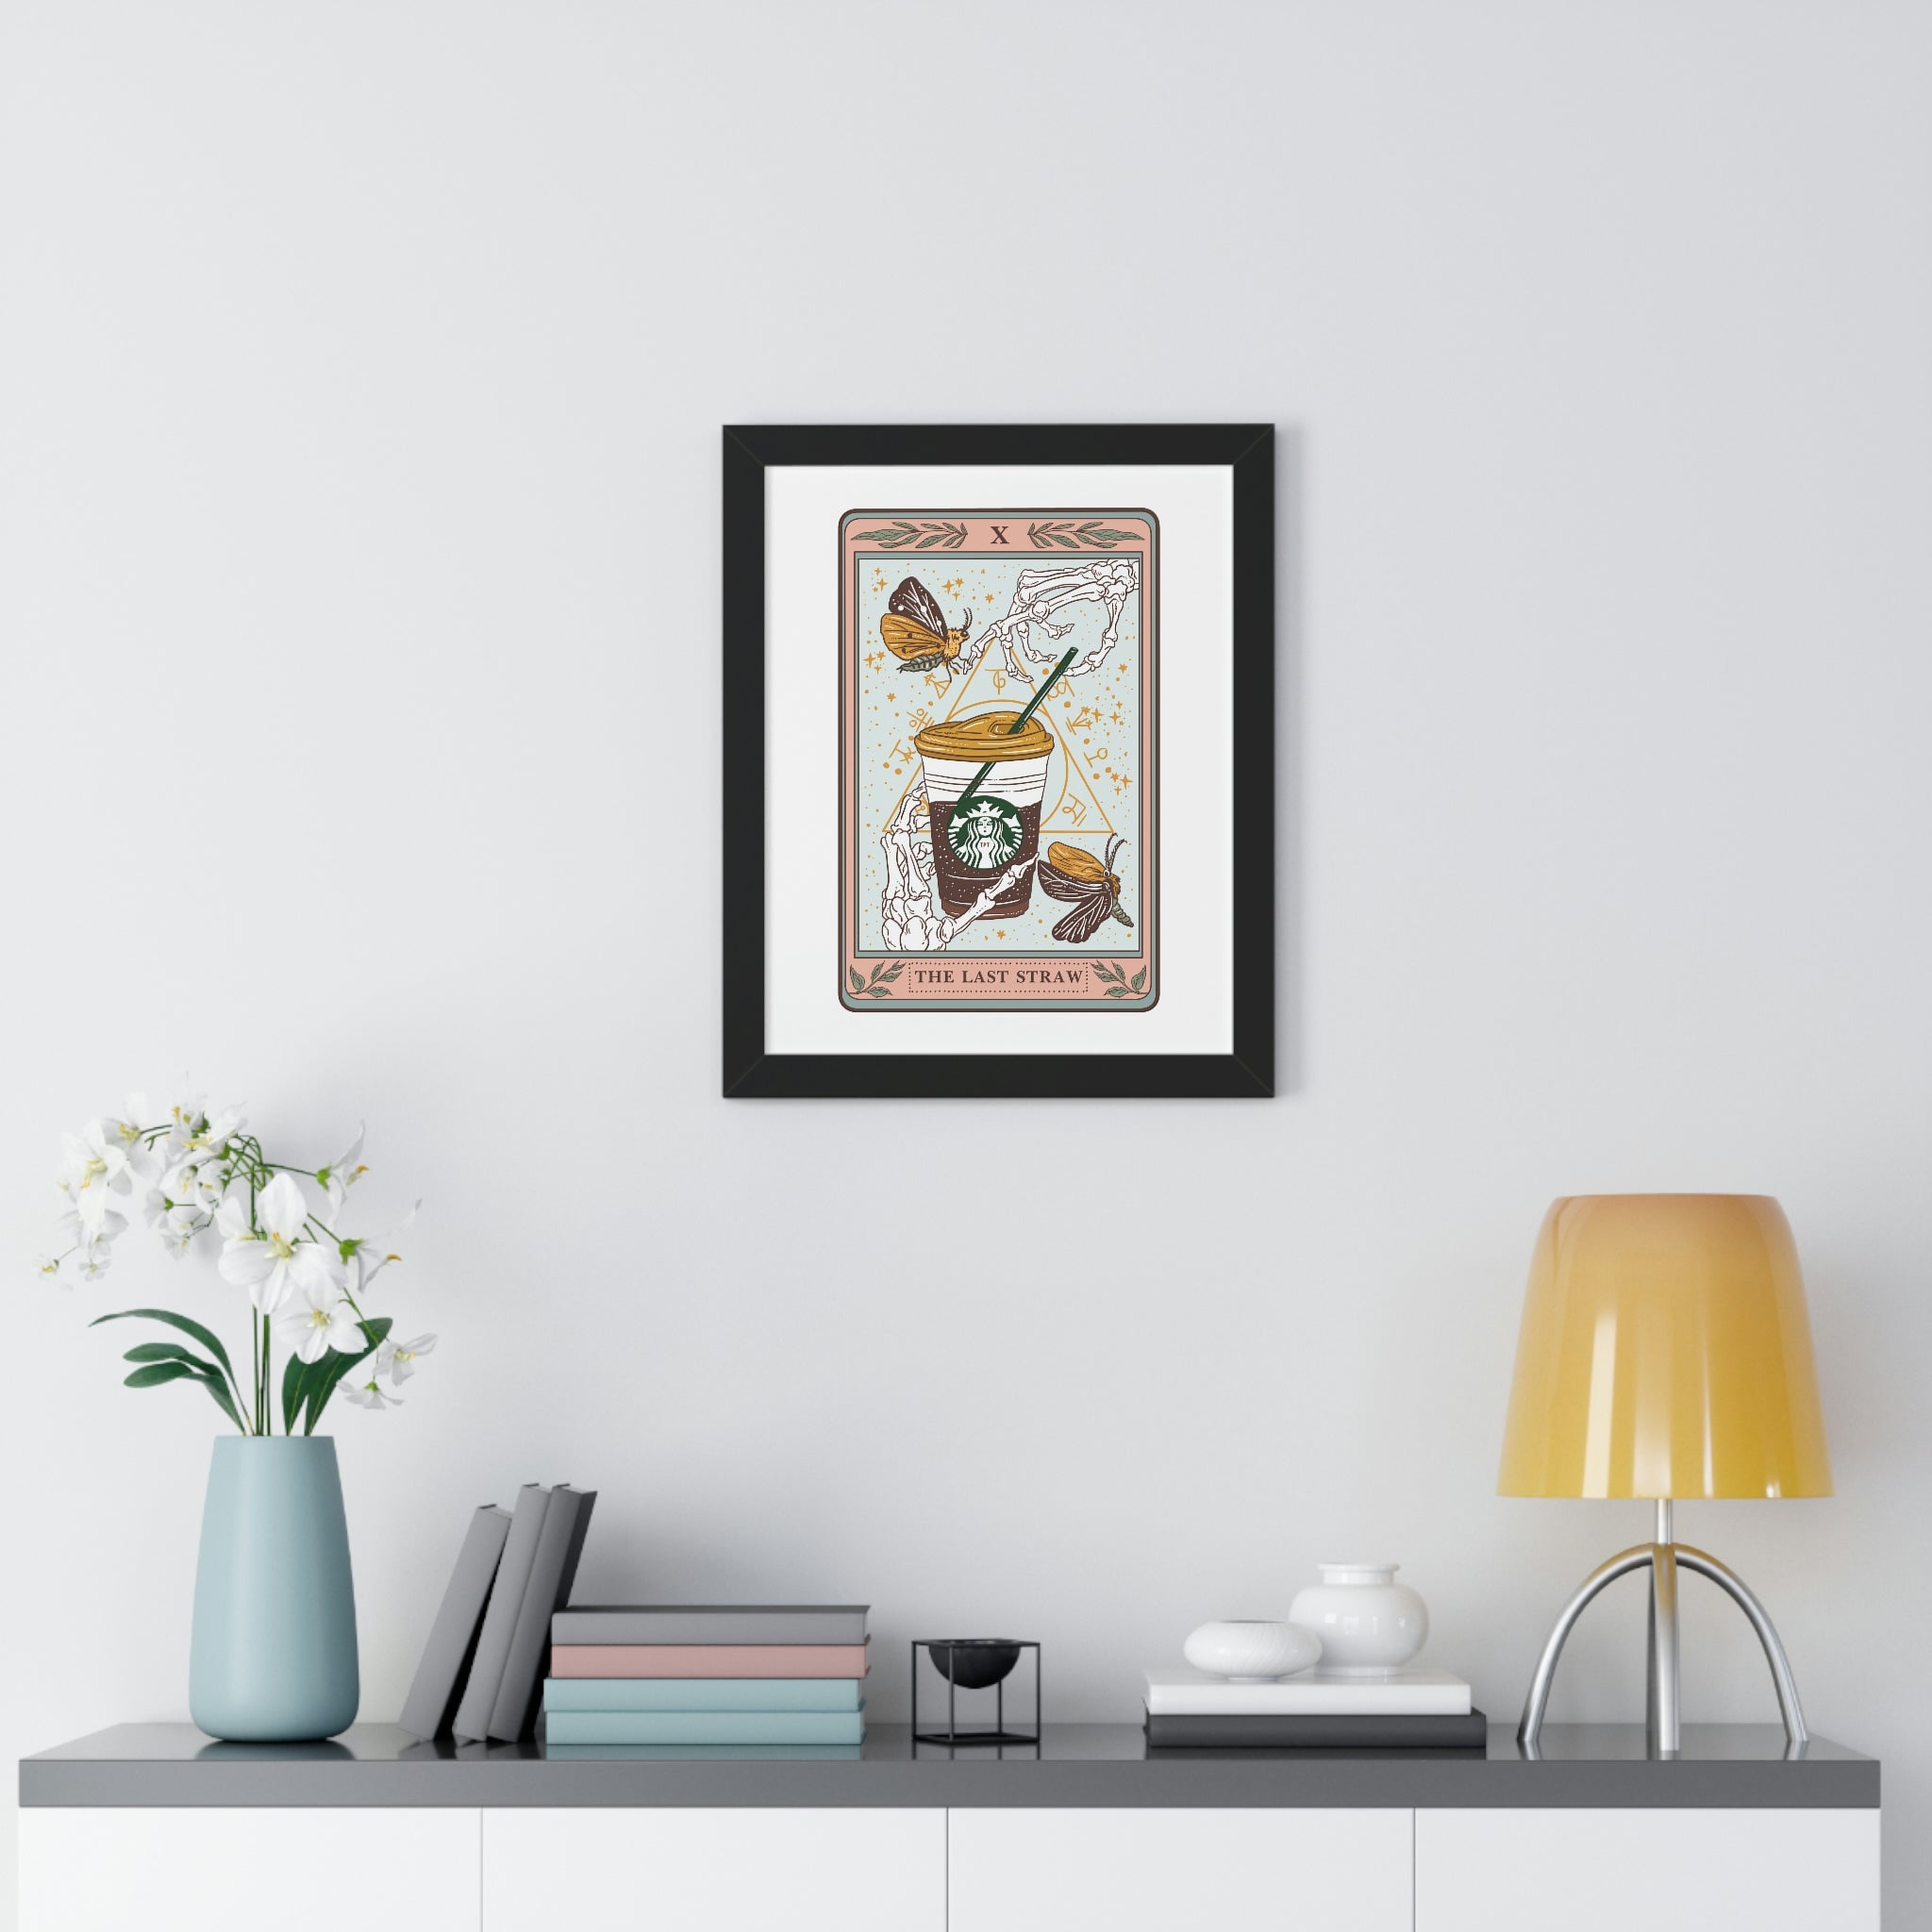 THE LAST STRAW // FRAMED POSTER PRINT